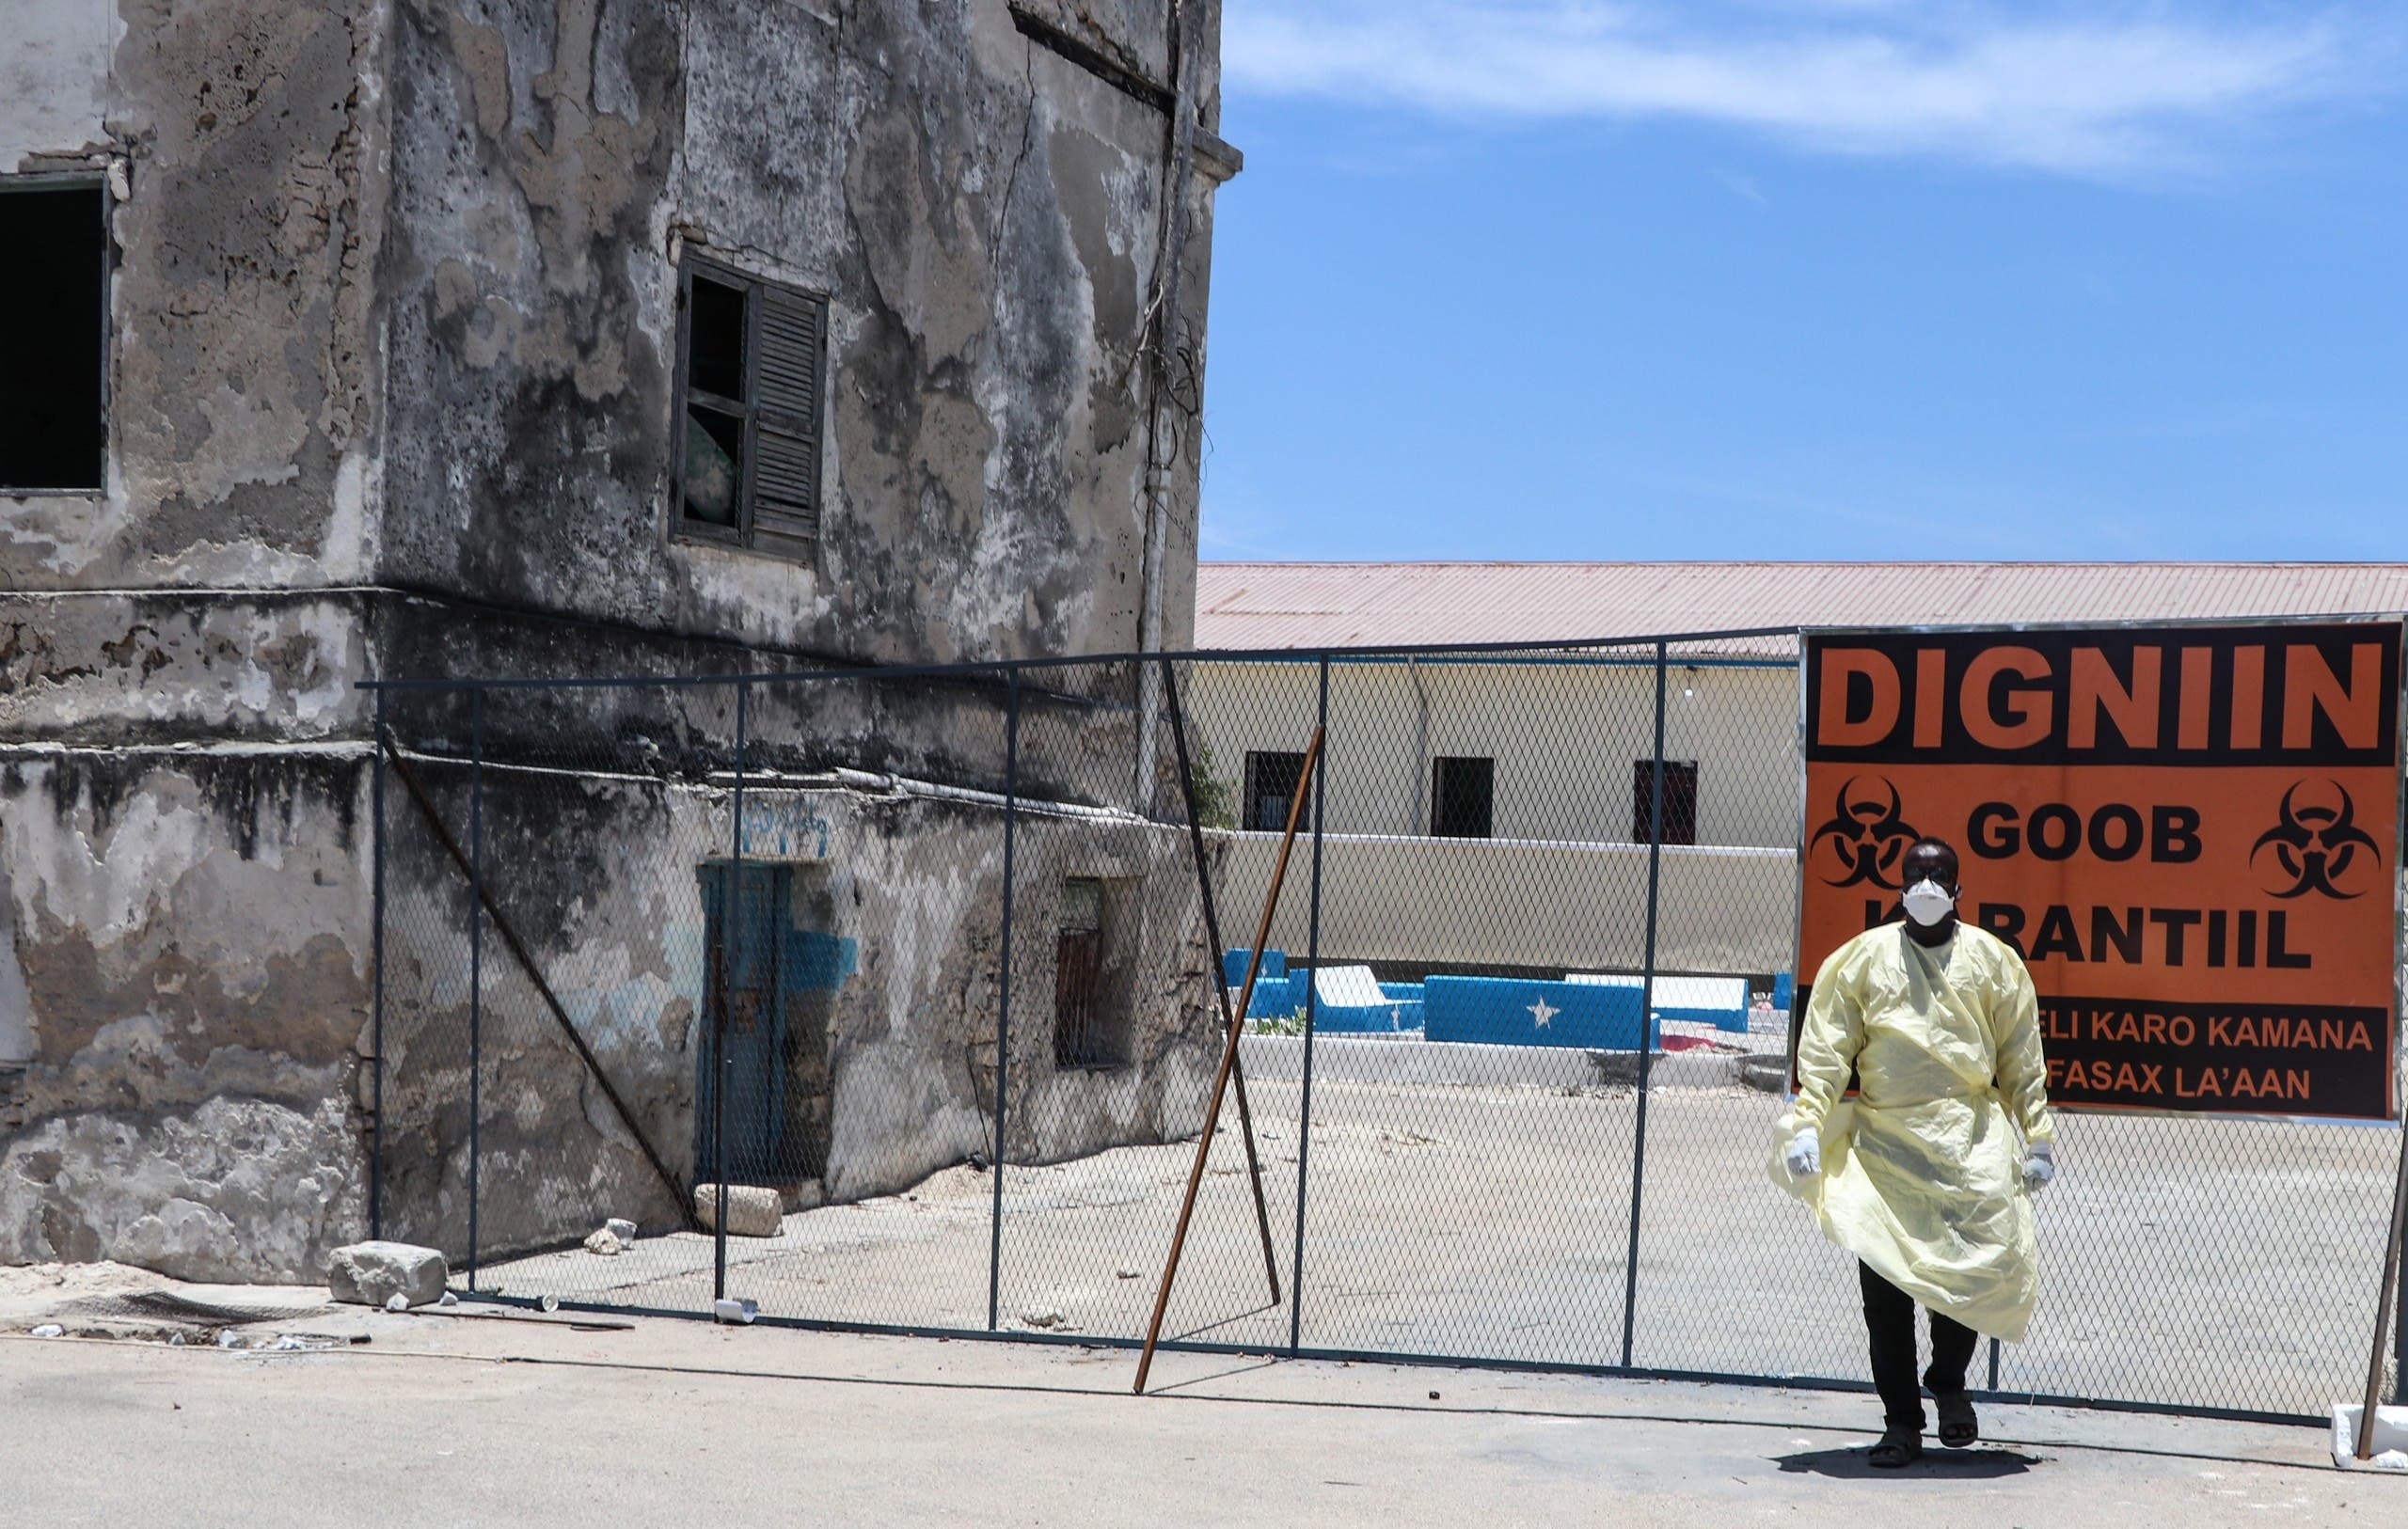 An ambulance driver wearing protective gears walks near the isolation unit for COVID-19 patients at Martini hospital in Mogadishu on March 29, 2020. (AFP)